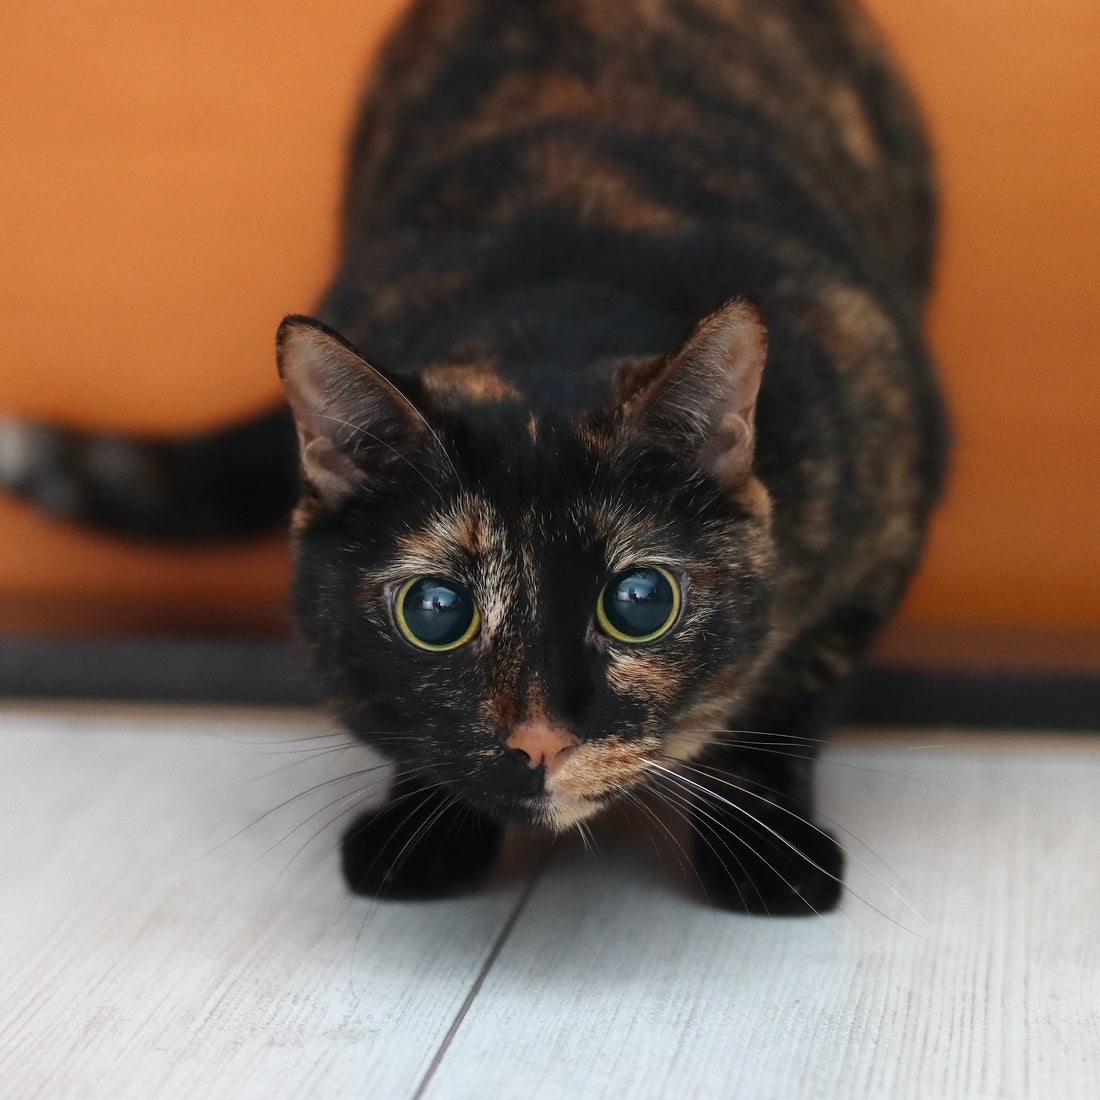 Is Your Cat Staring at You? What It Means in Cat Language